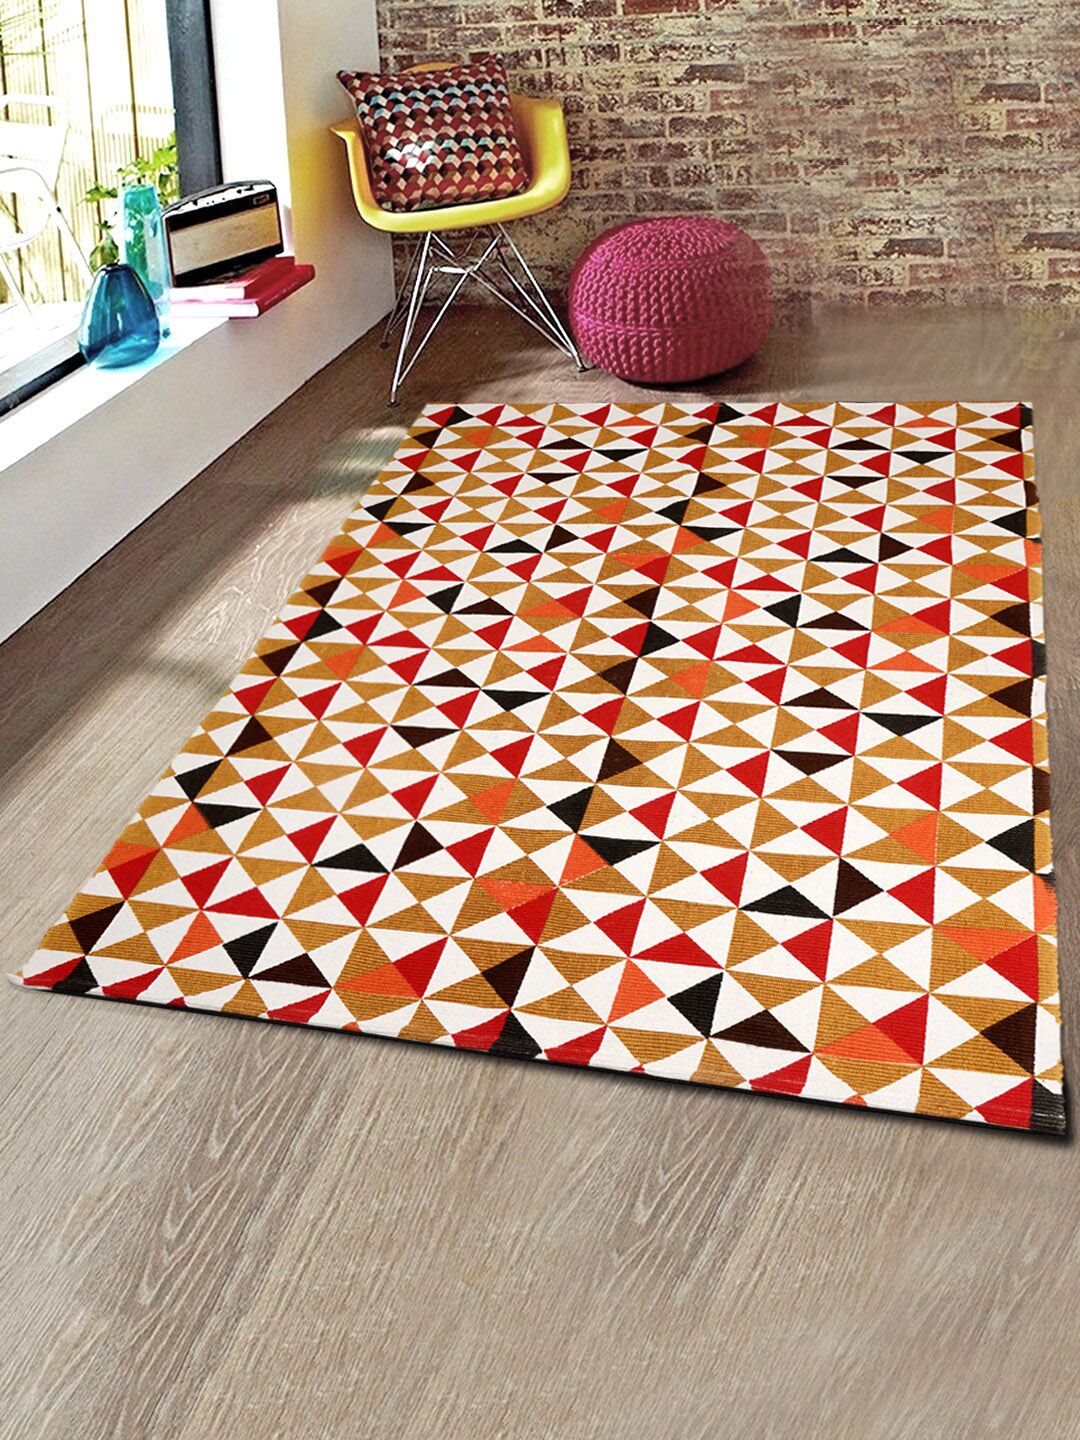 Saral Home Red & Brown Printed Cotton Carpet Price in India